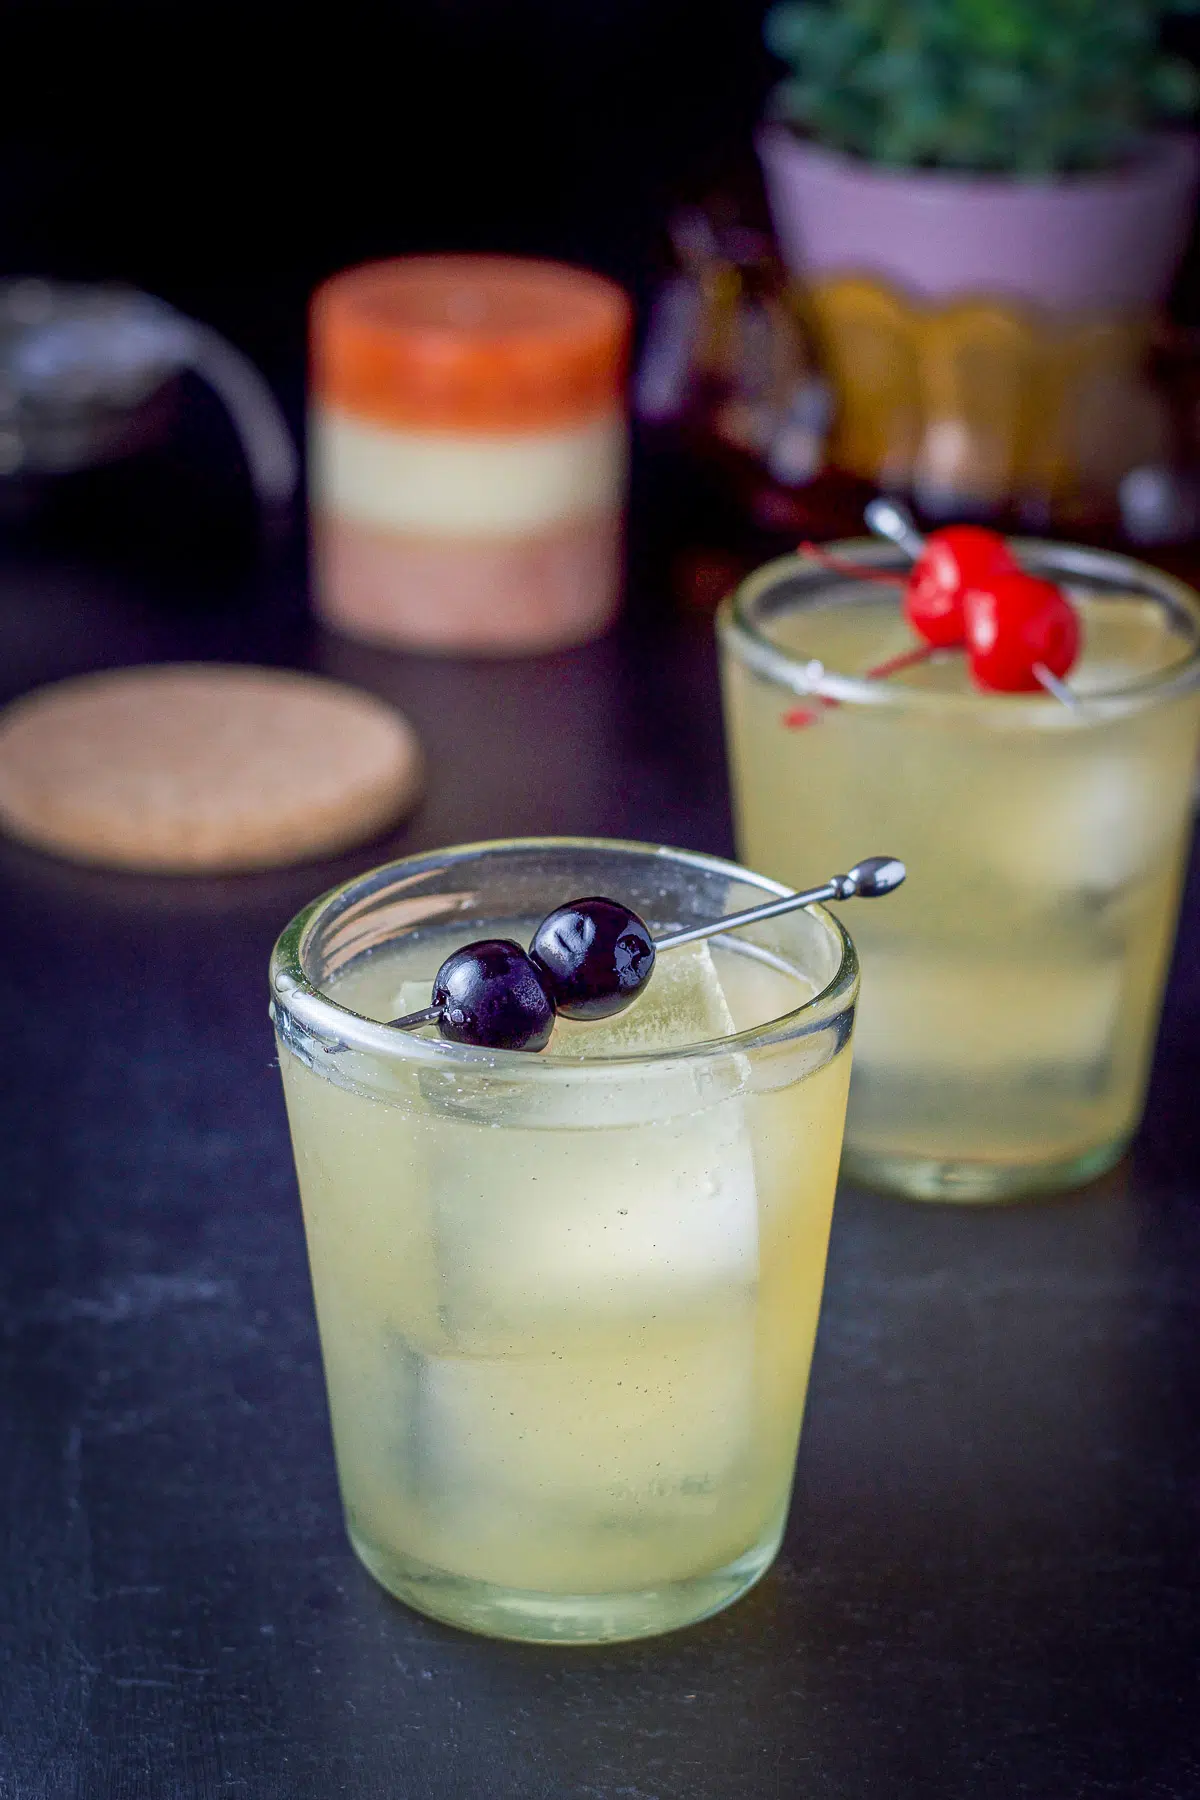 Two glasses with cherries as garnish filled with the whiskey drink